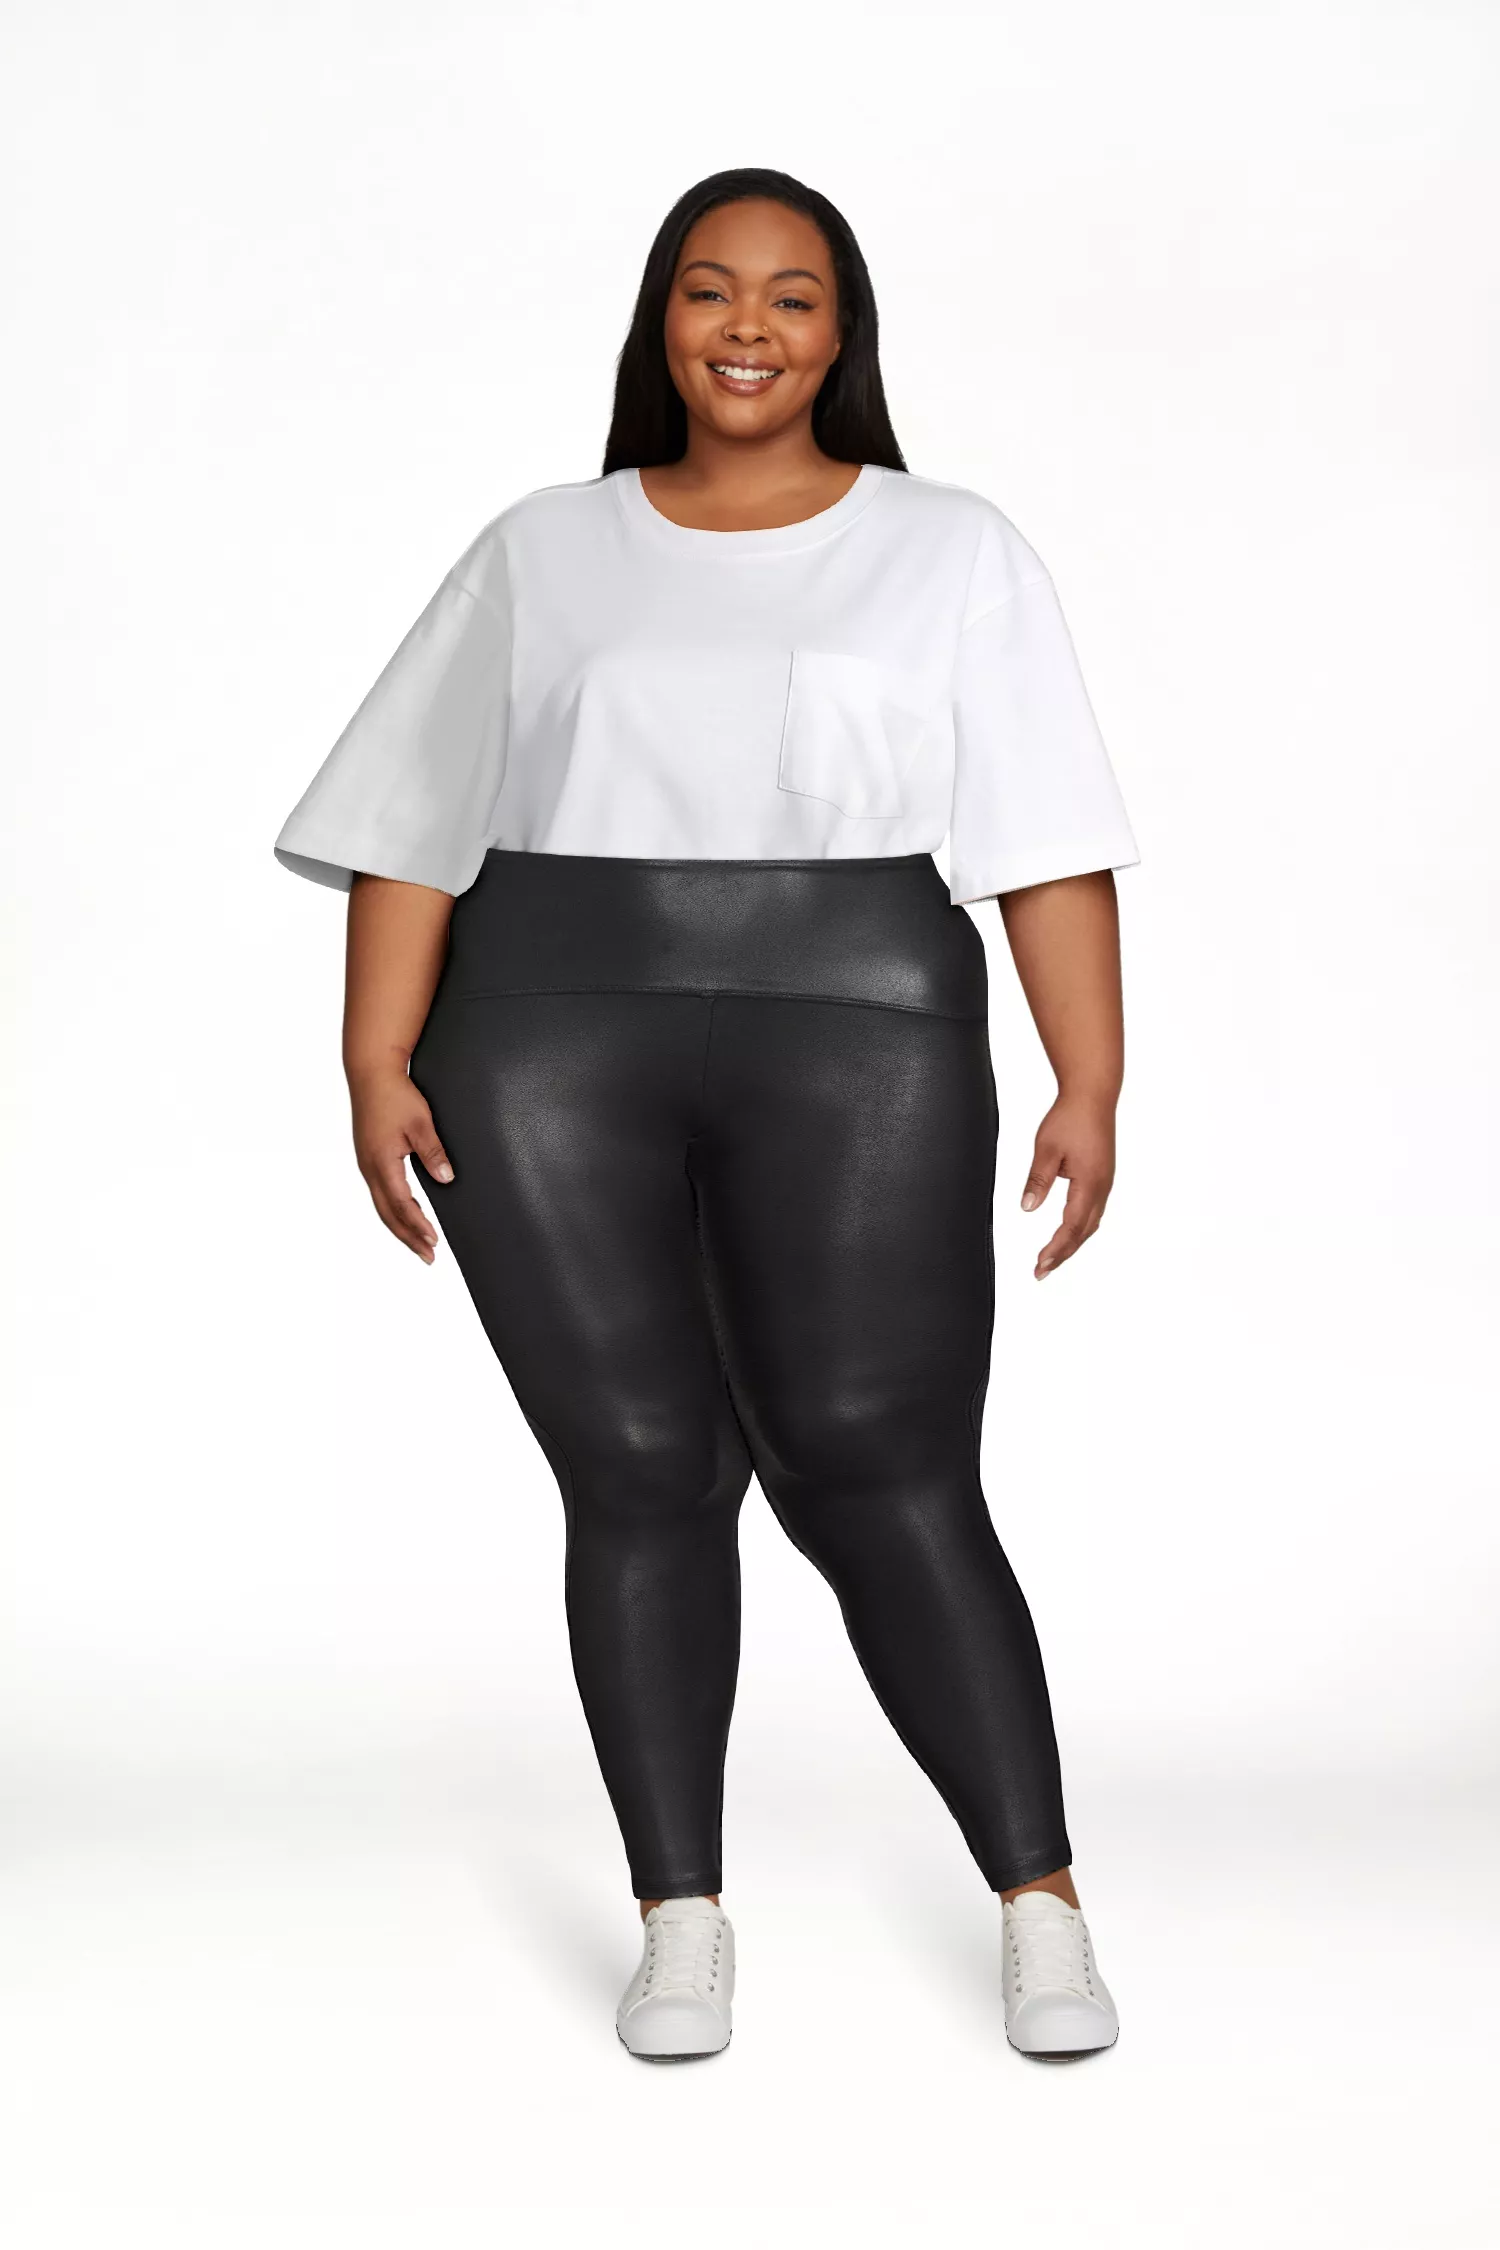 Time and Tru Women's Faux Leather Leggings, Sizes S-3XL 